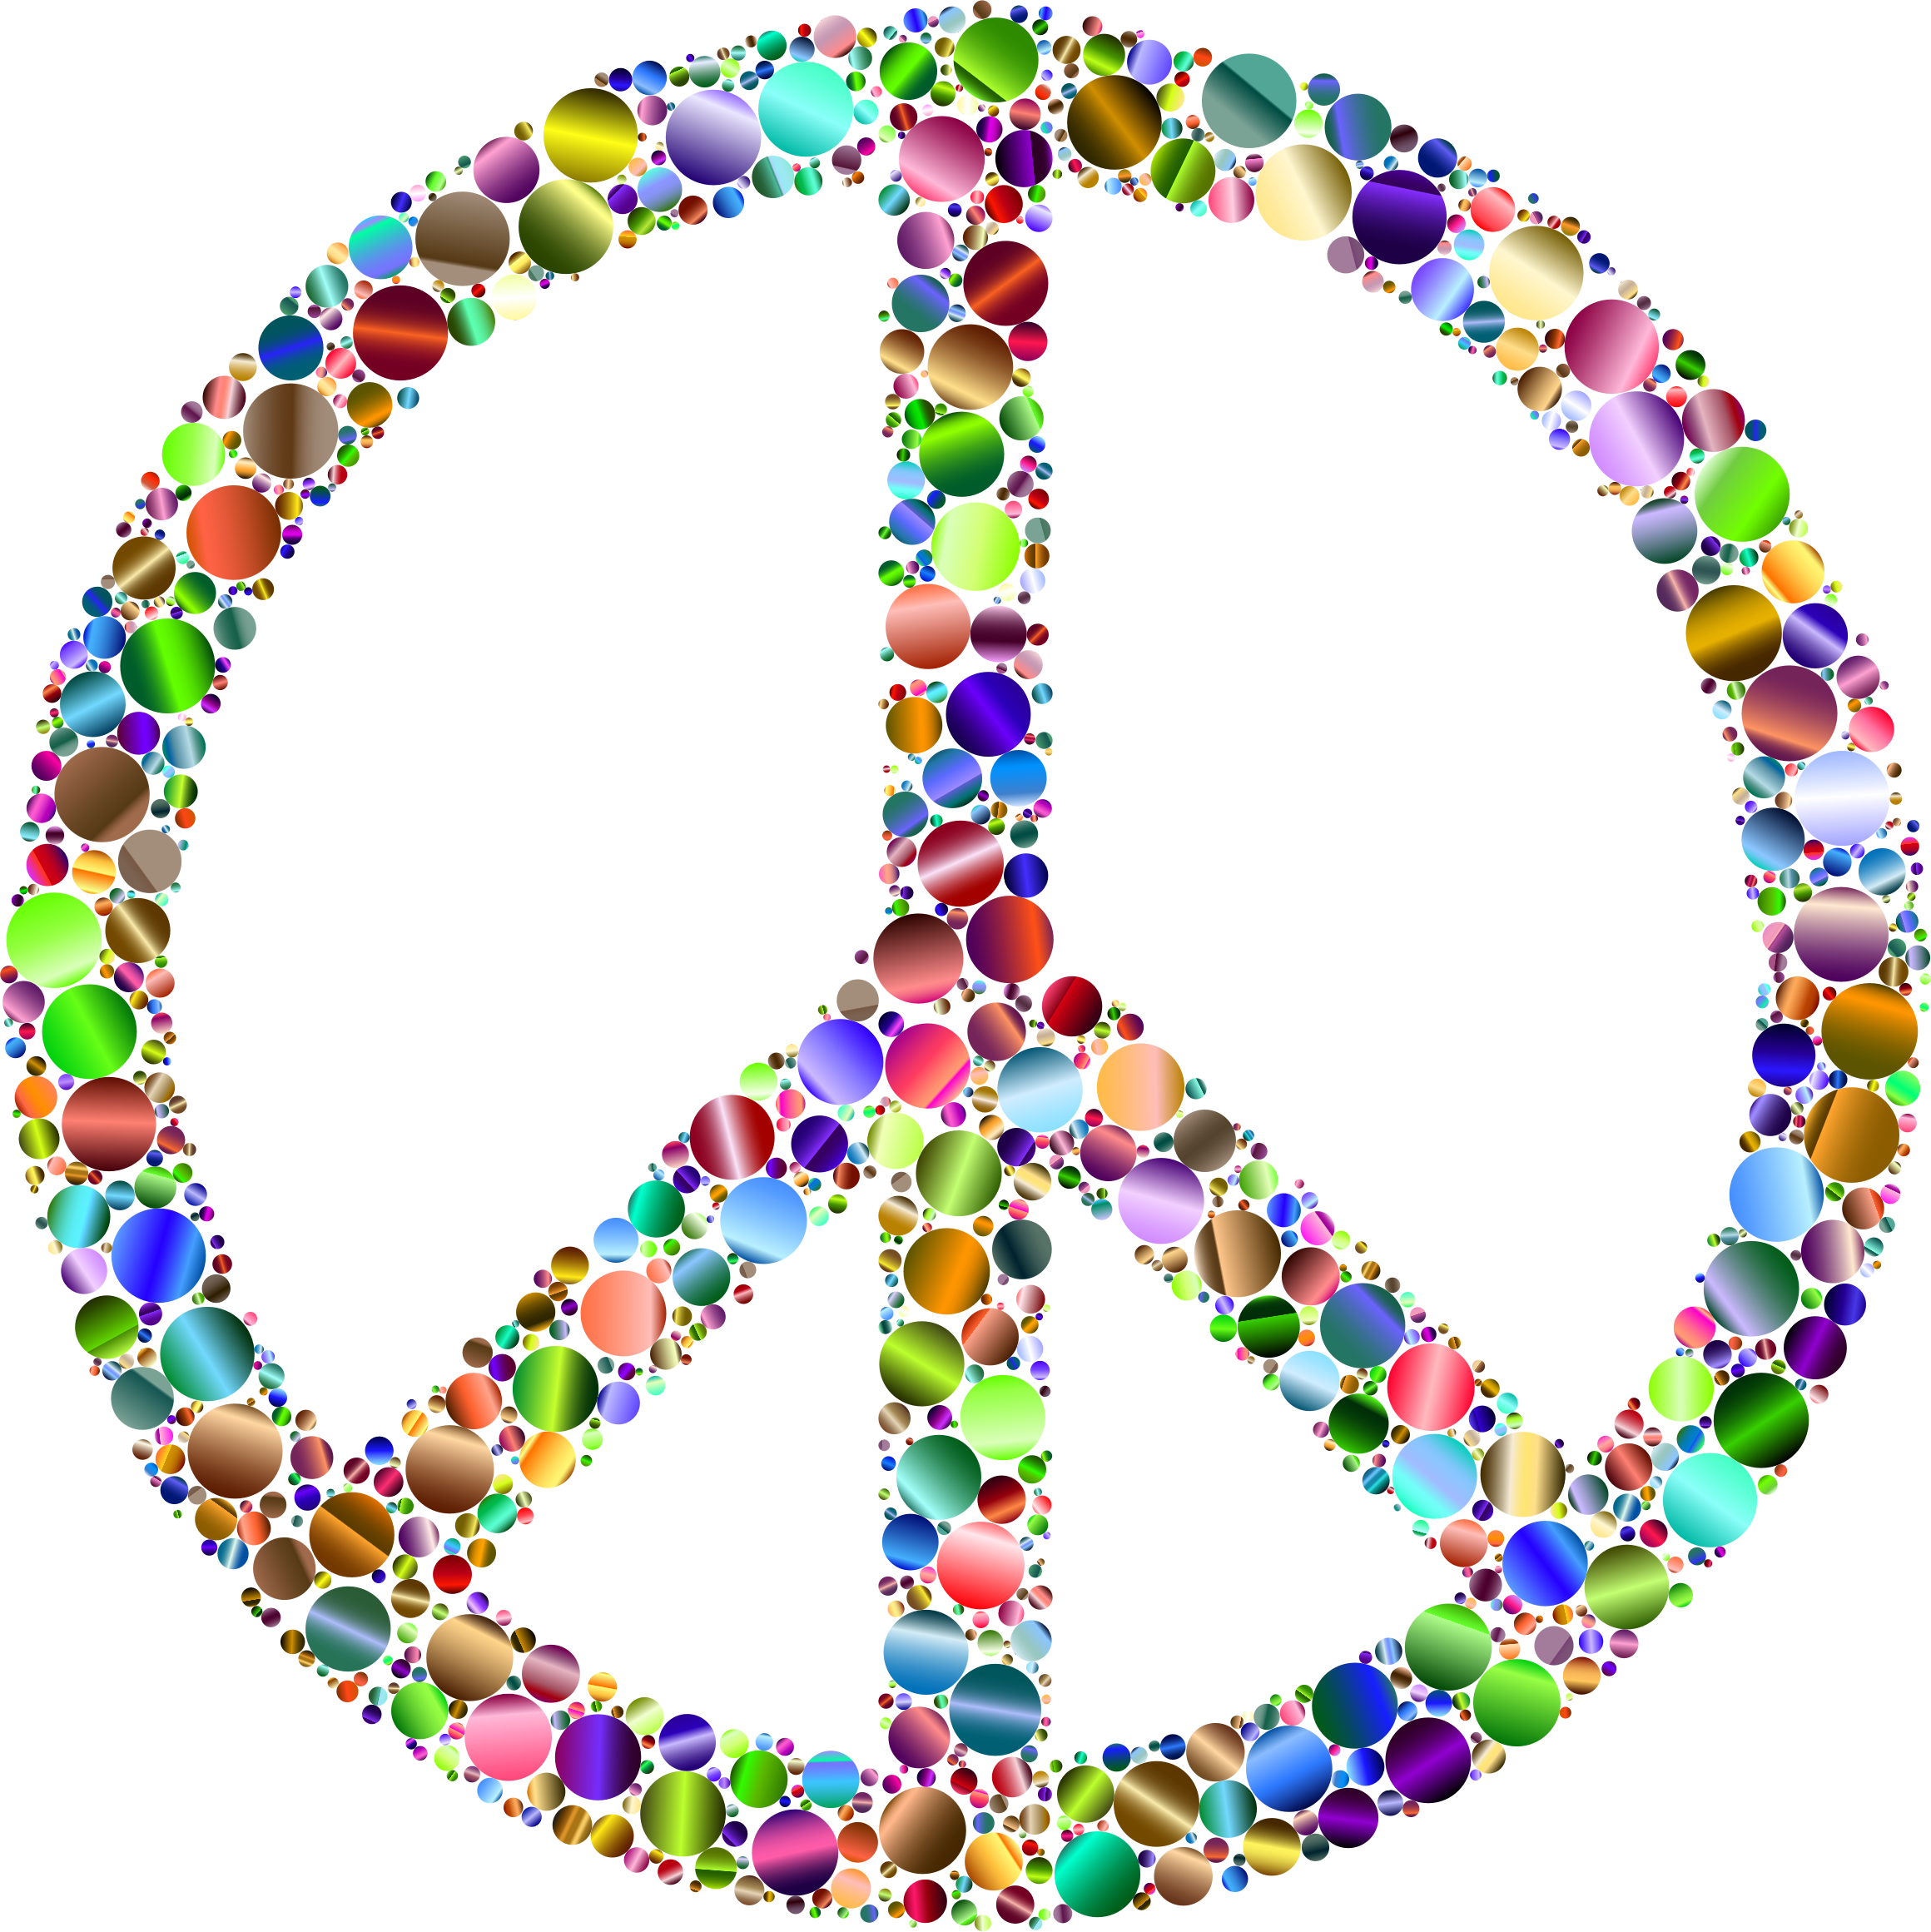 Colorful Circles Peace Sign 15 By Gdj